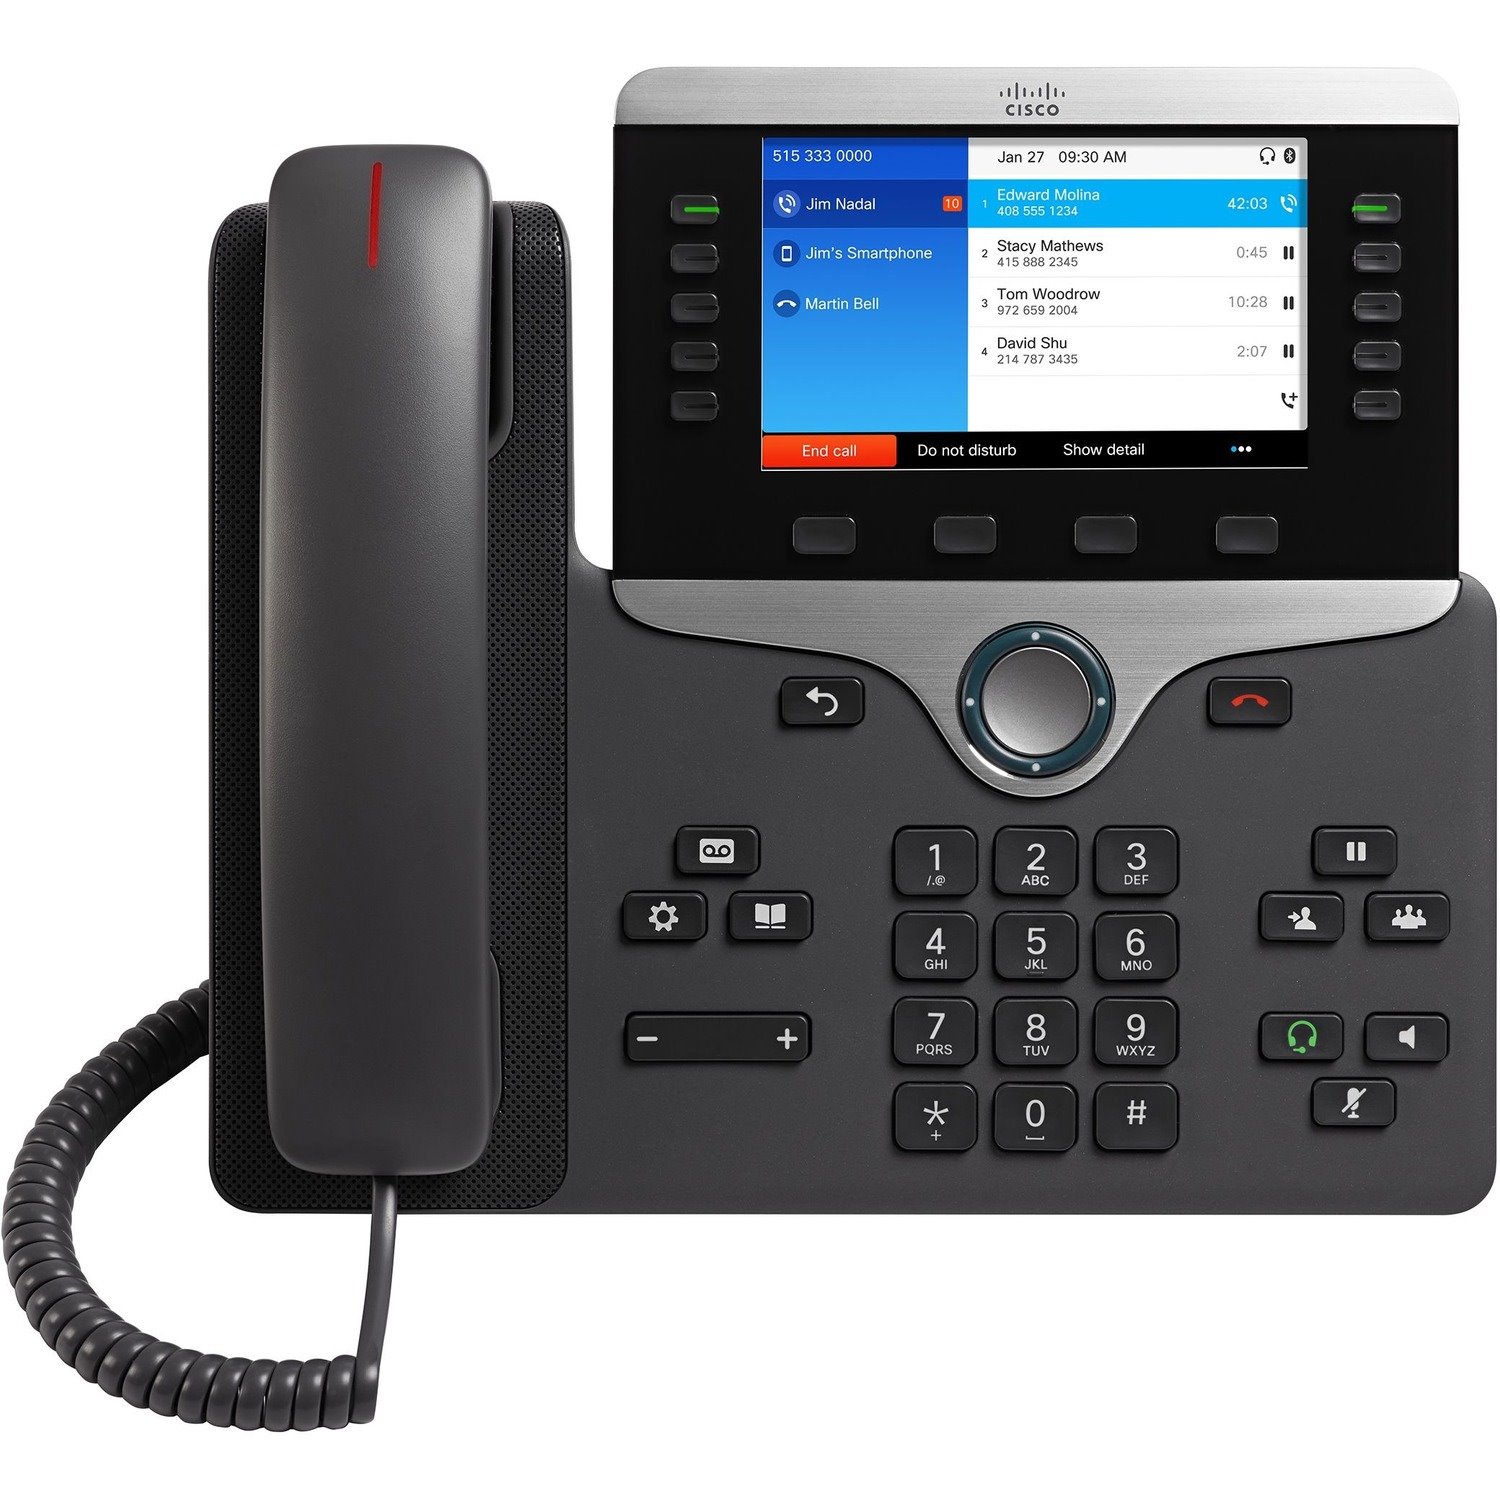 Cisco 8851 IP Phone - Corded/Cordless - Corded - Bluetooth - Desktop, Wall Mountable - Charcoal